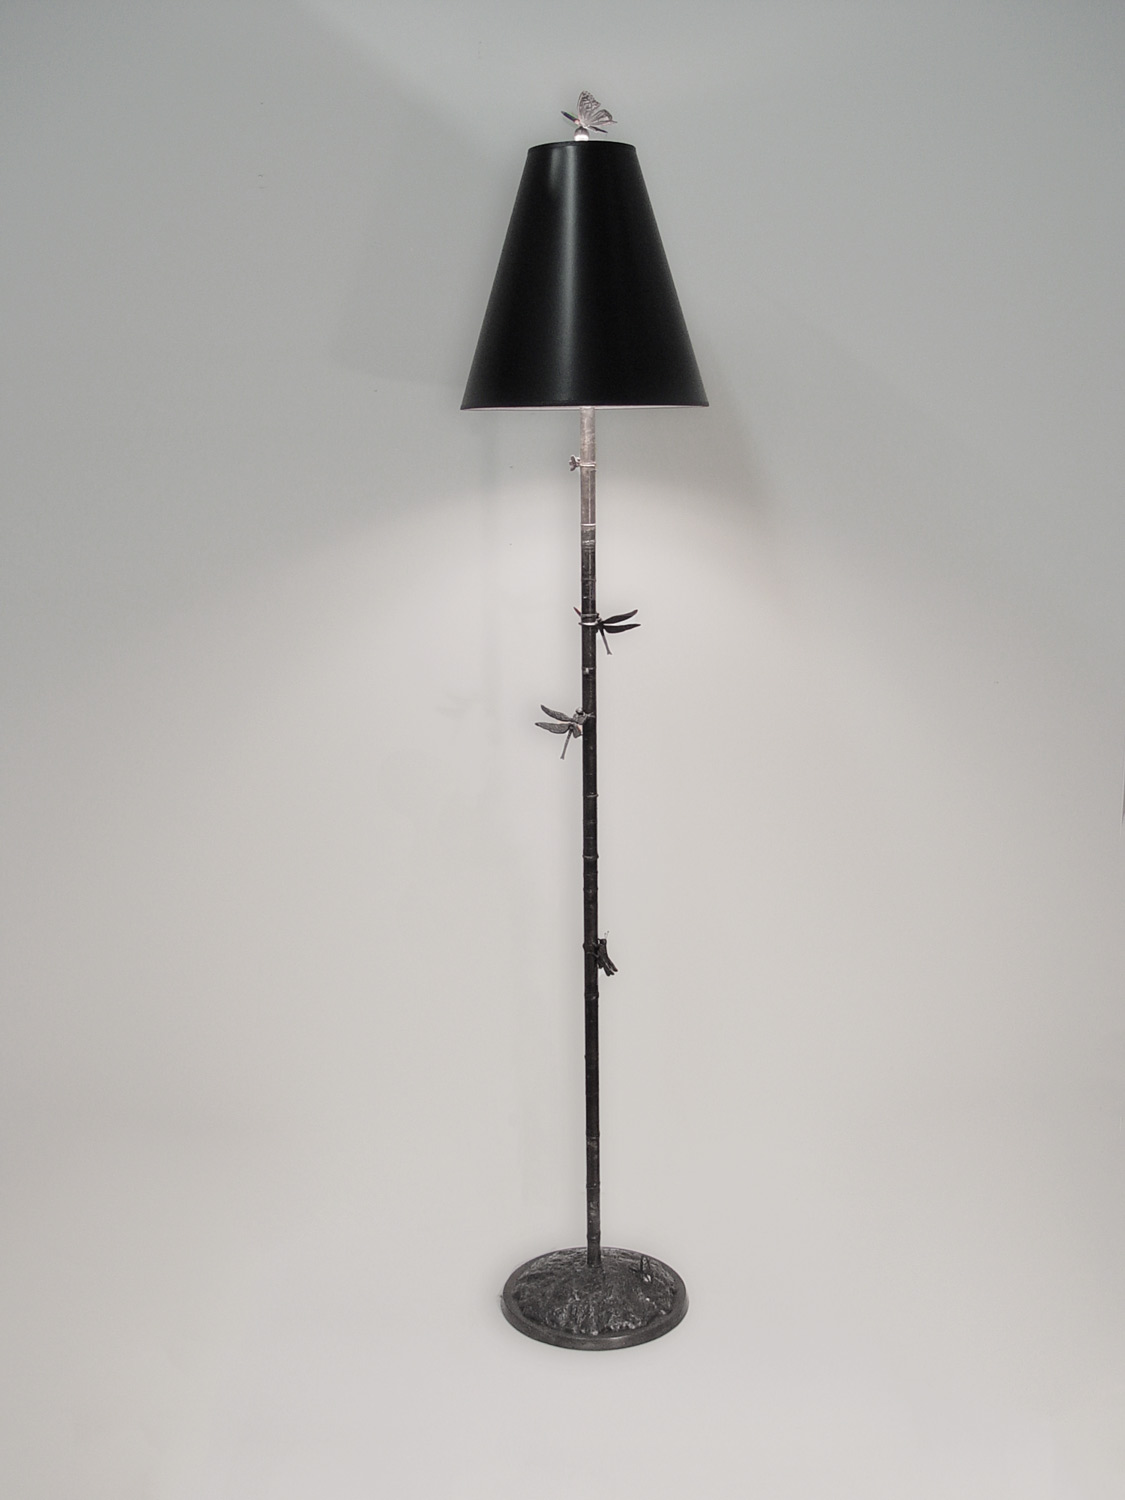 Tall Standing Lamp with Dragonflies and Grasshoppers by Charles H. Reinike III